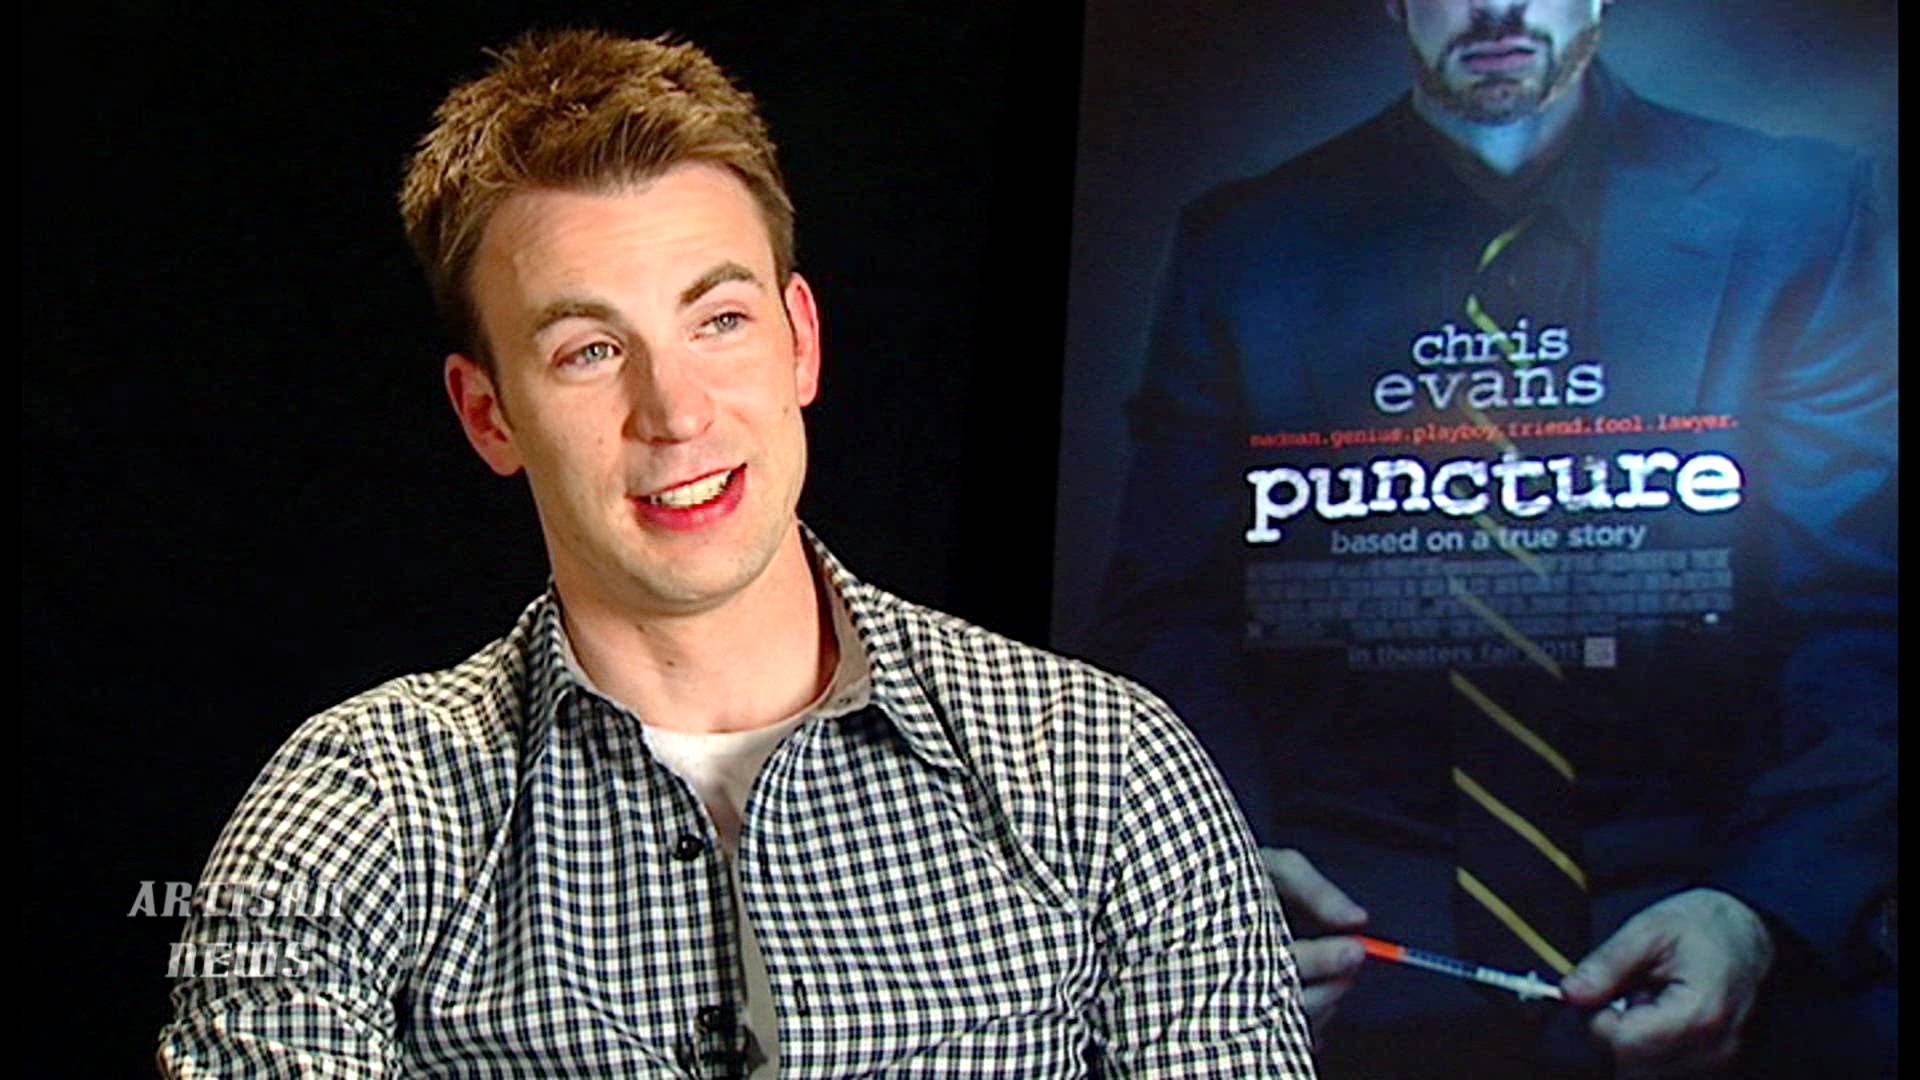 CHRIS EVANS INTERVIEW: PUNCTURE - YouTube